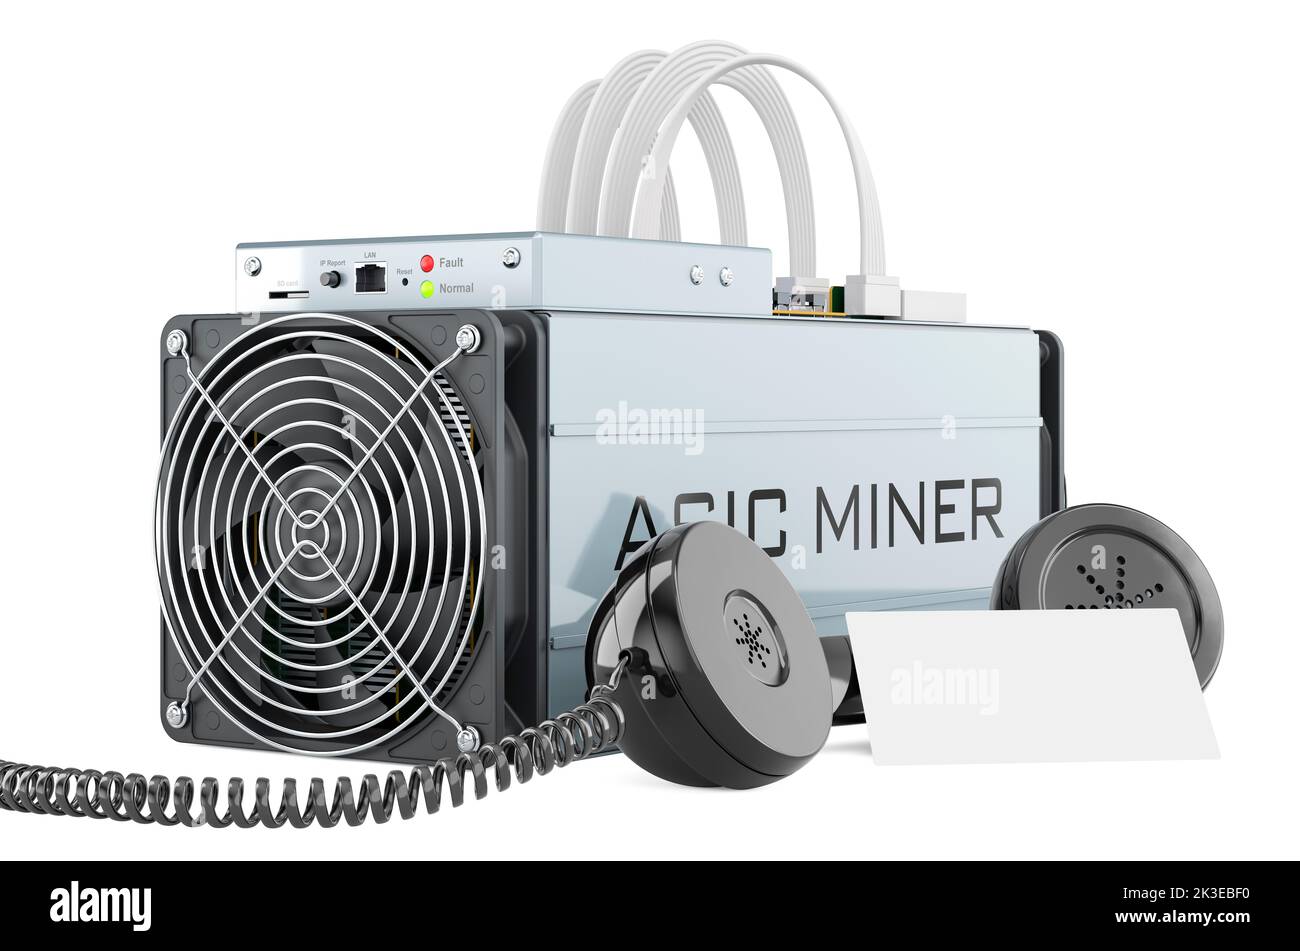 ASIC miner with blank business card and retro phone receiver. 3D rendering isolated on white background Stock Photo